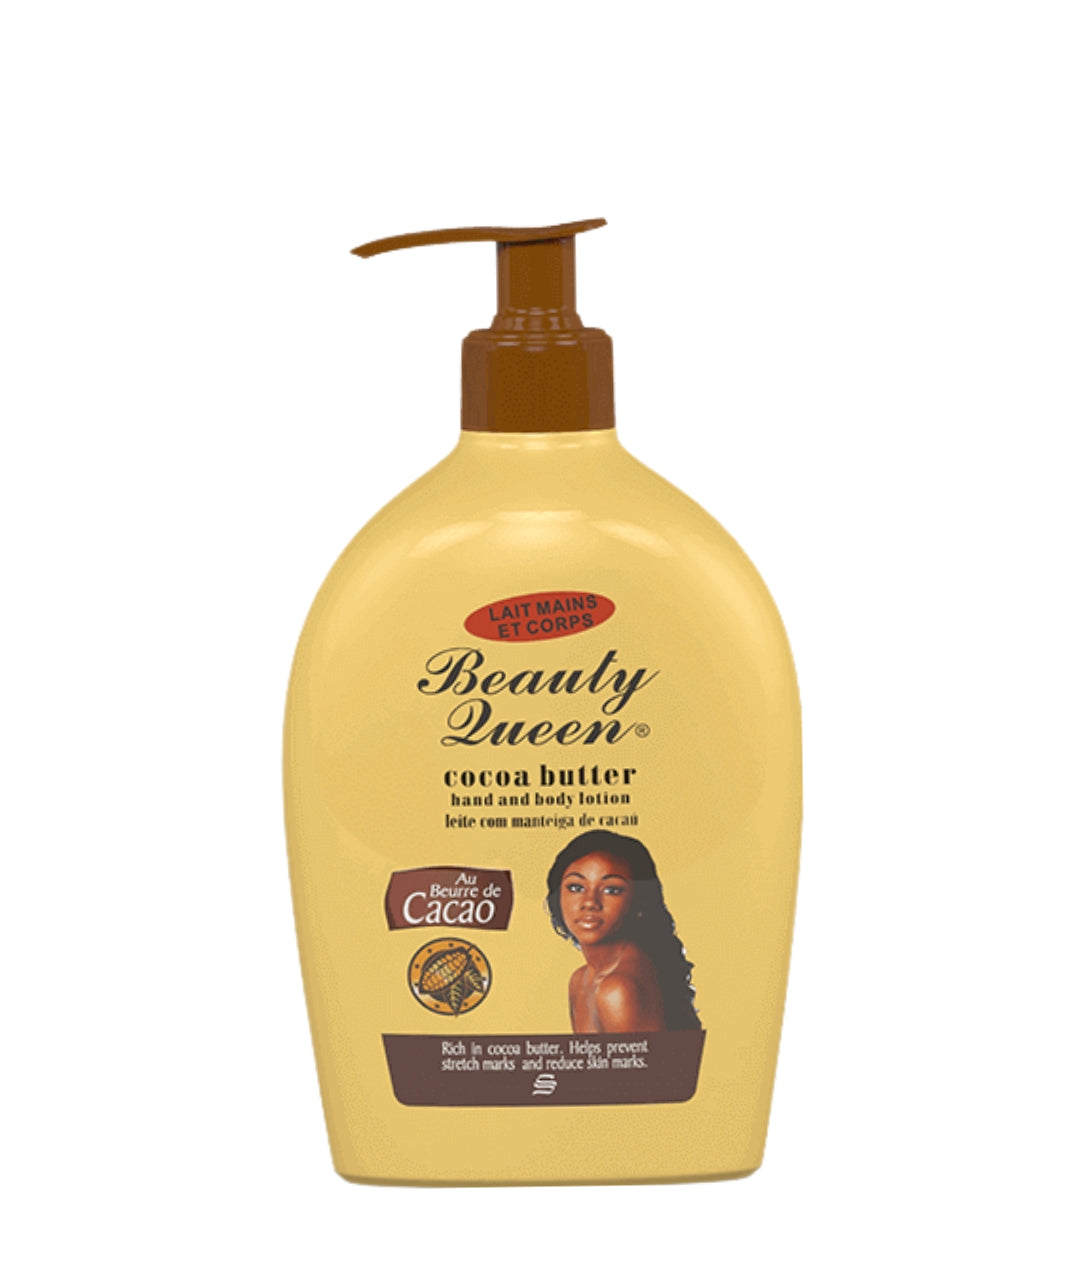 Beauty Queen Cocoa Butter Hand and Body Lotion